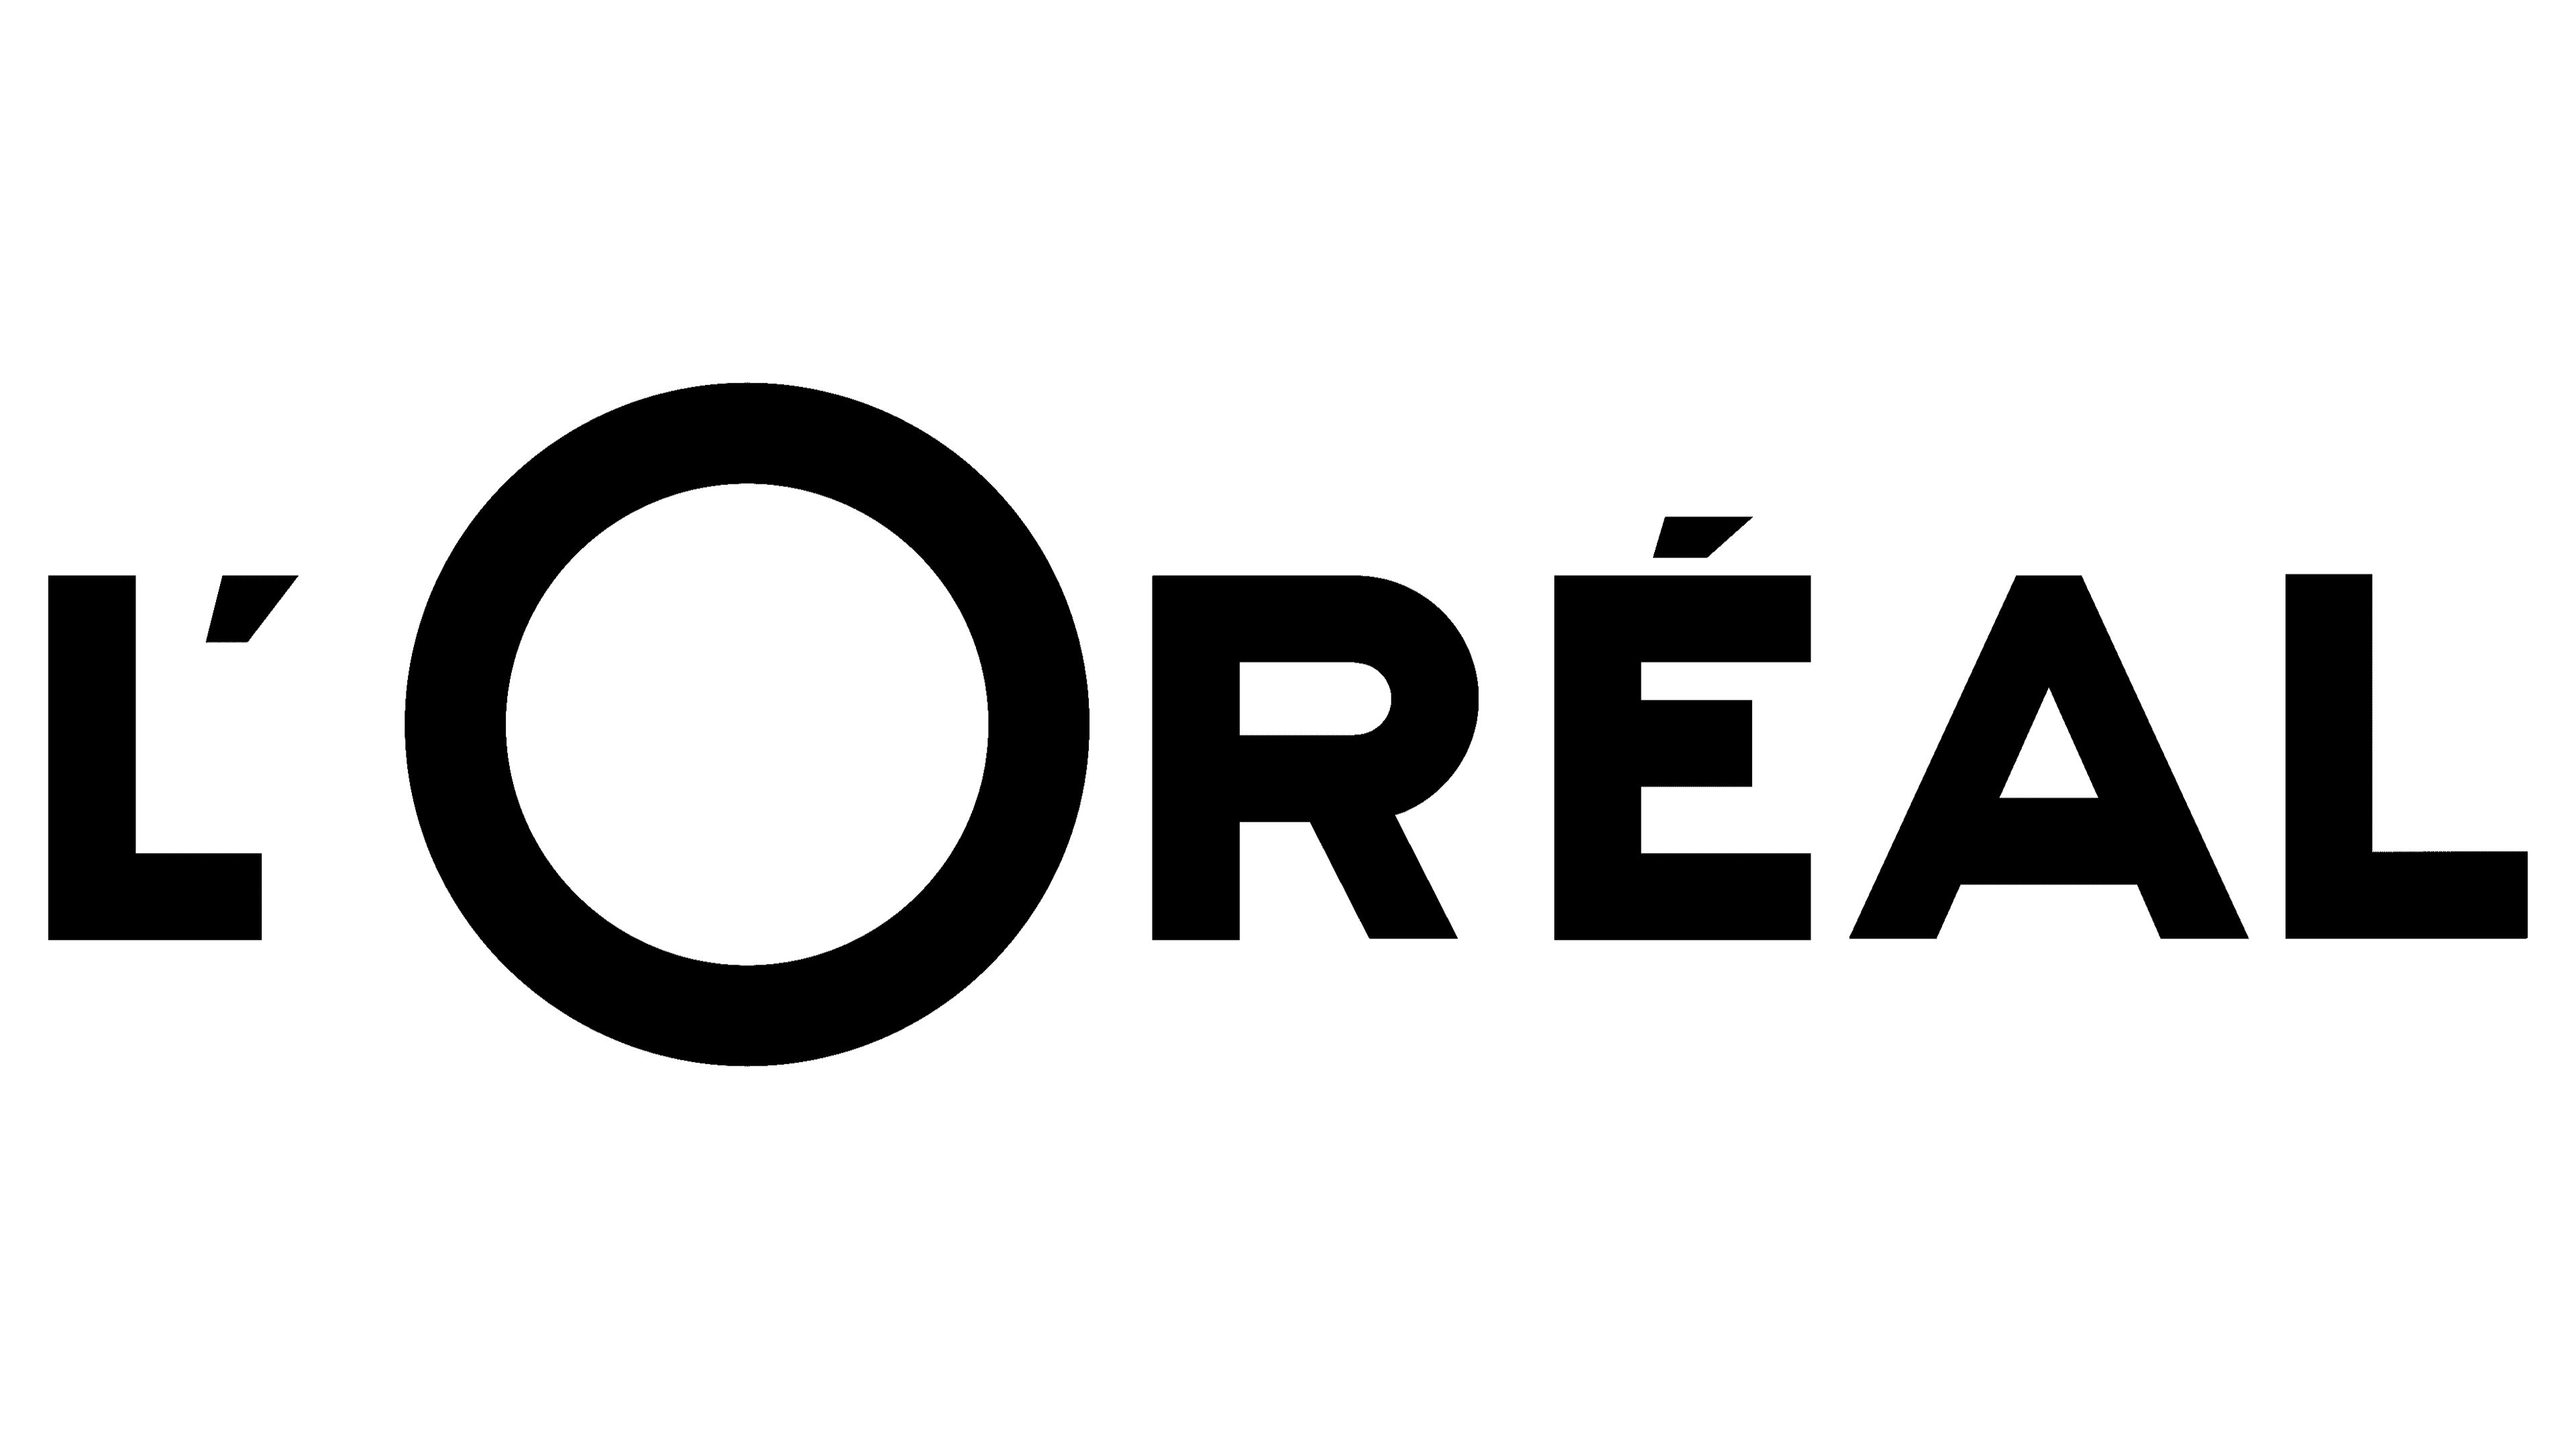 L’Oréal Logo History And L’Oréal Meaning